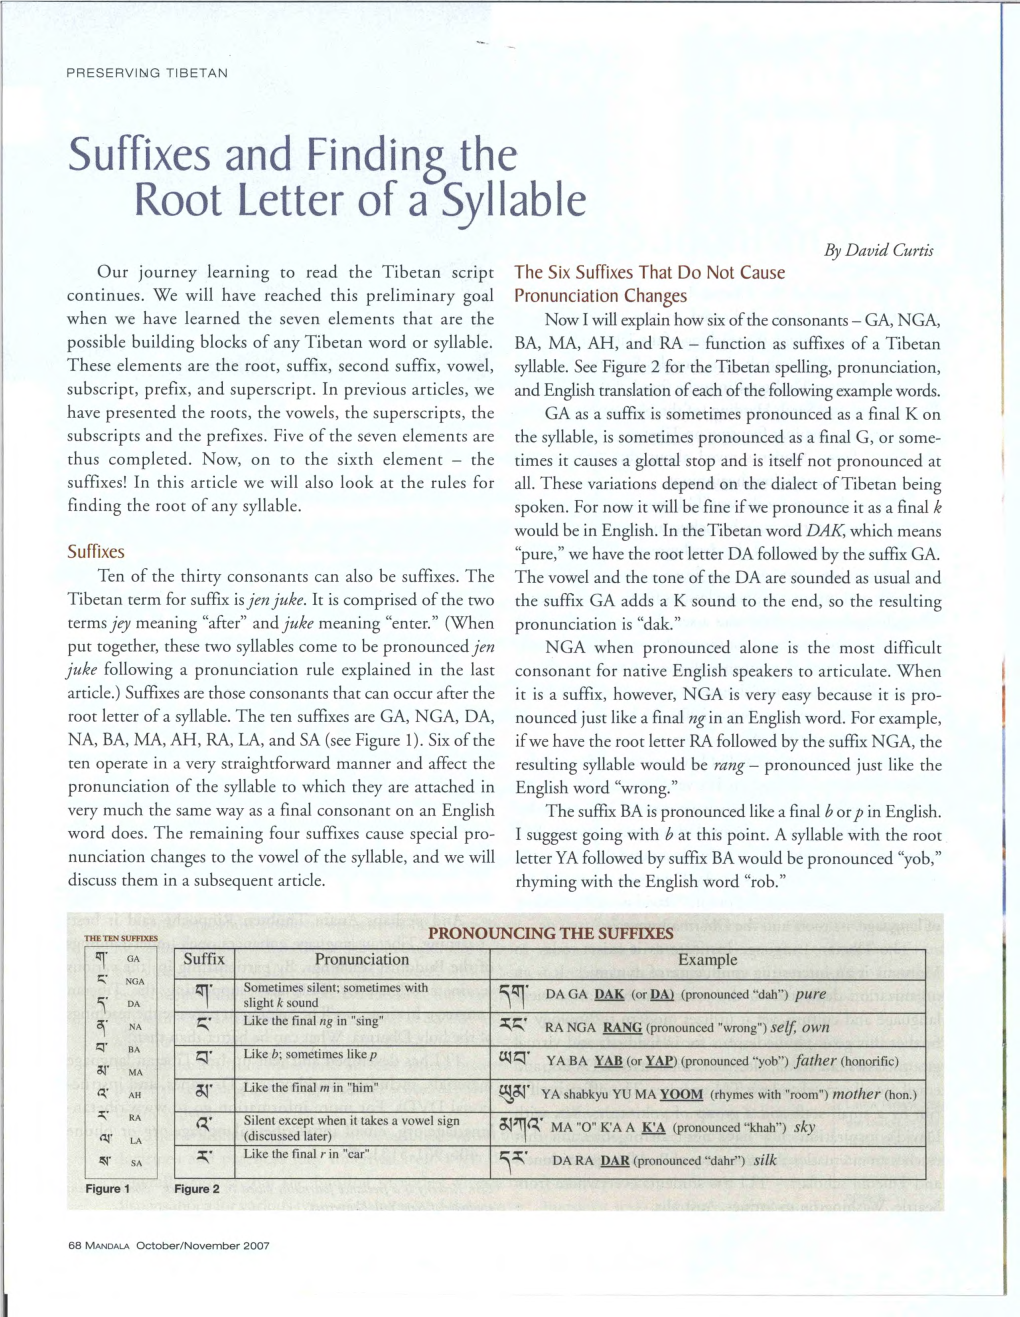 Suffixes and Finding the Root Letter of a Syllable by David Curtis Our Journey Learning to Read the Tibetan Script the Six Suffixes That Do Not Cause Continues